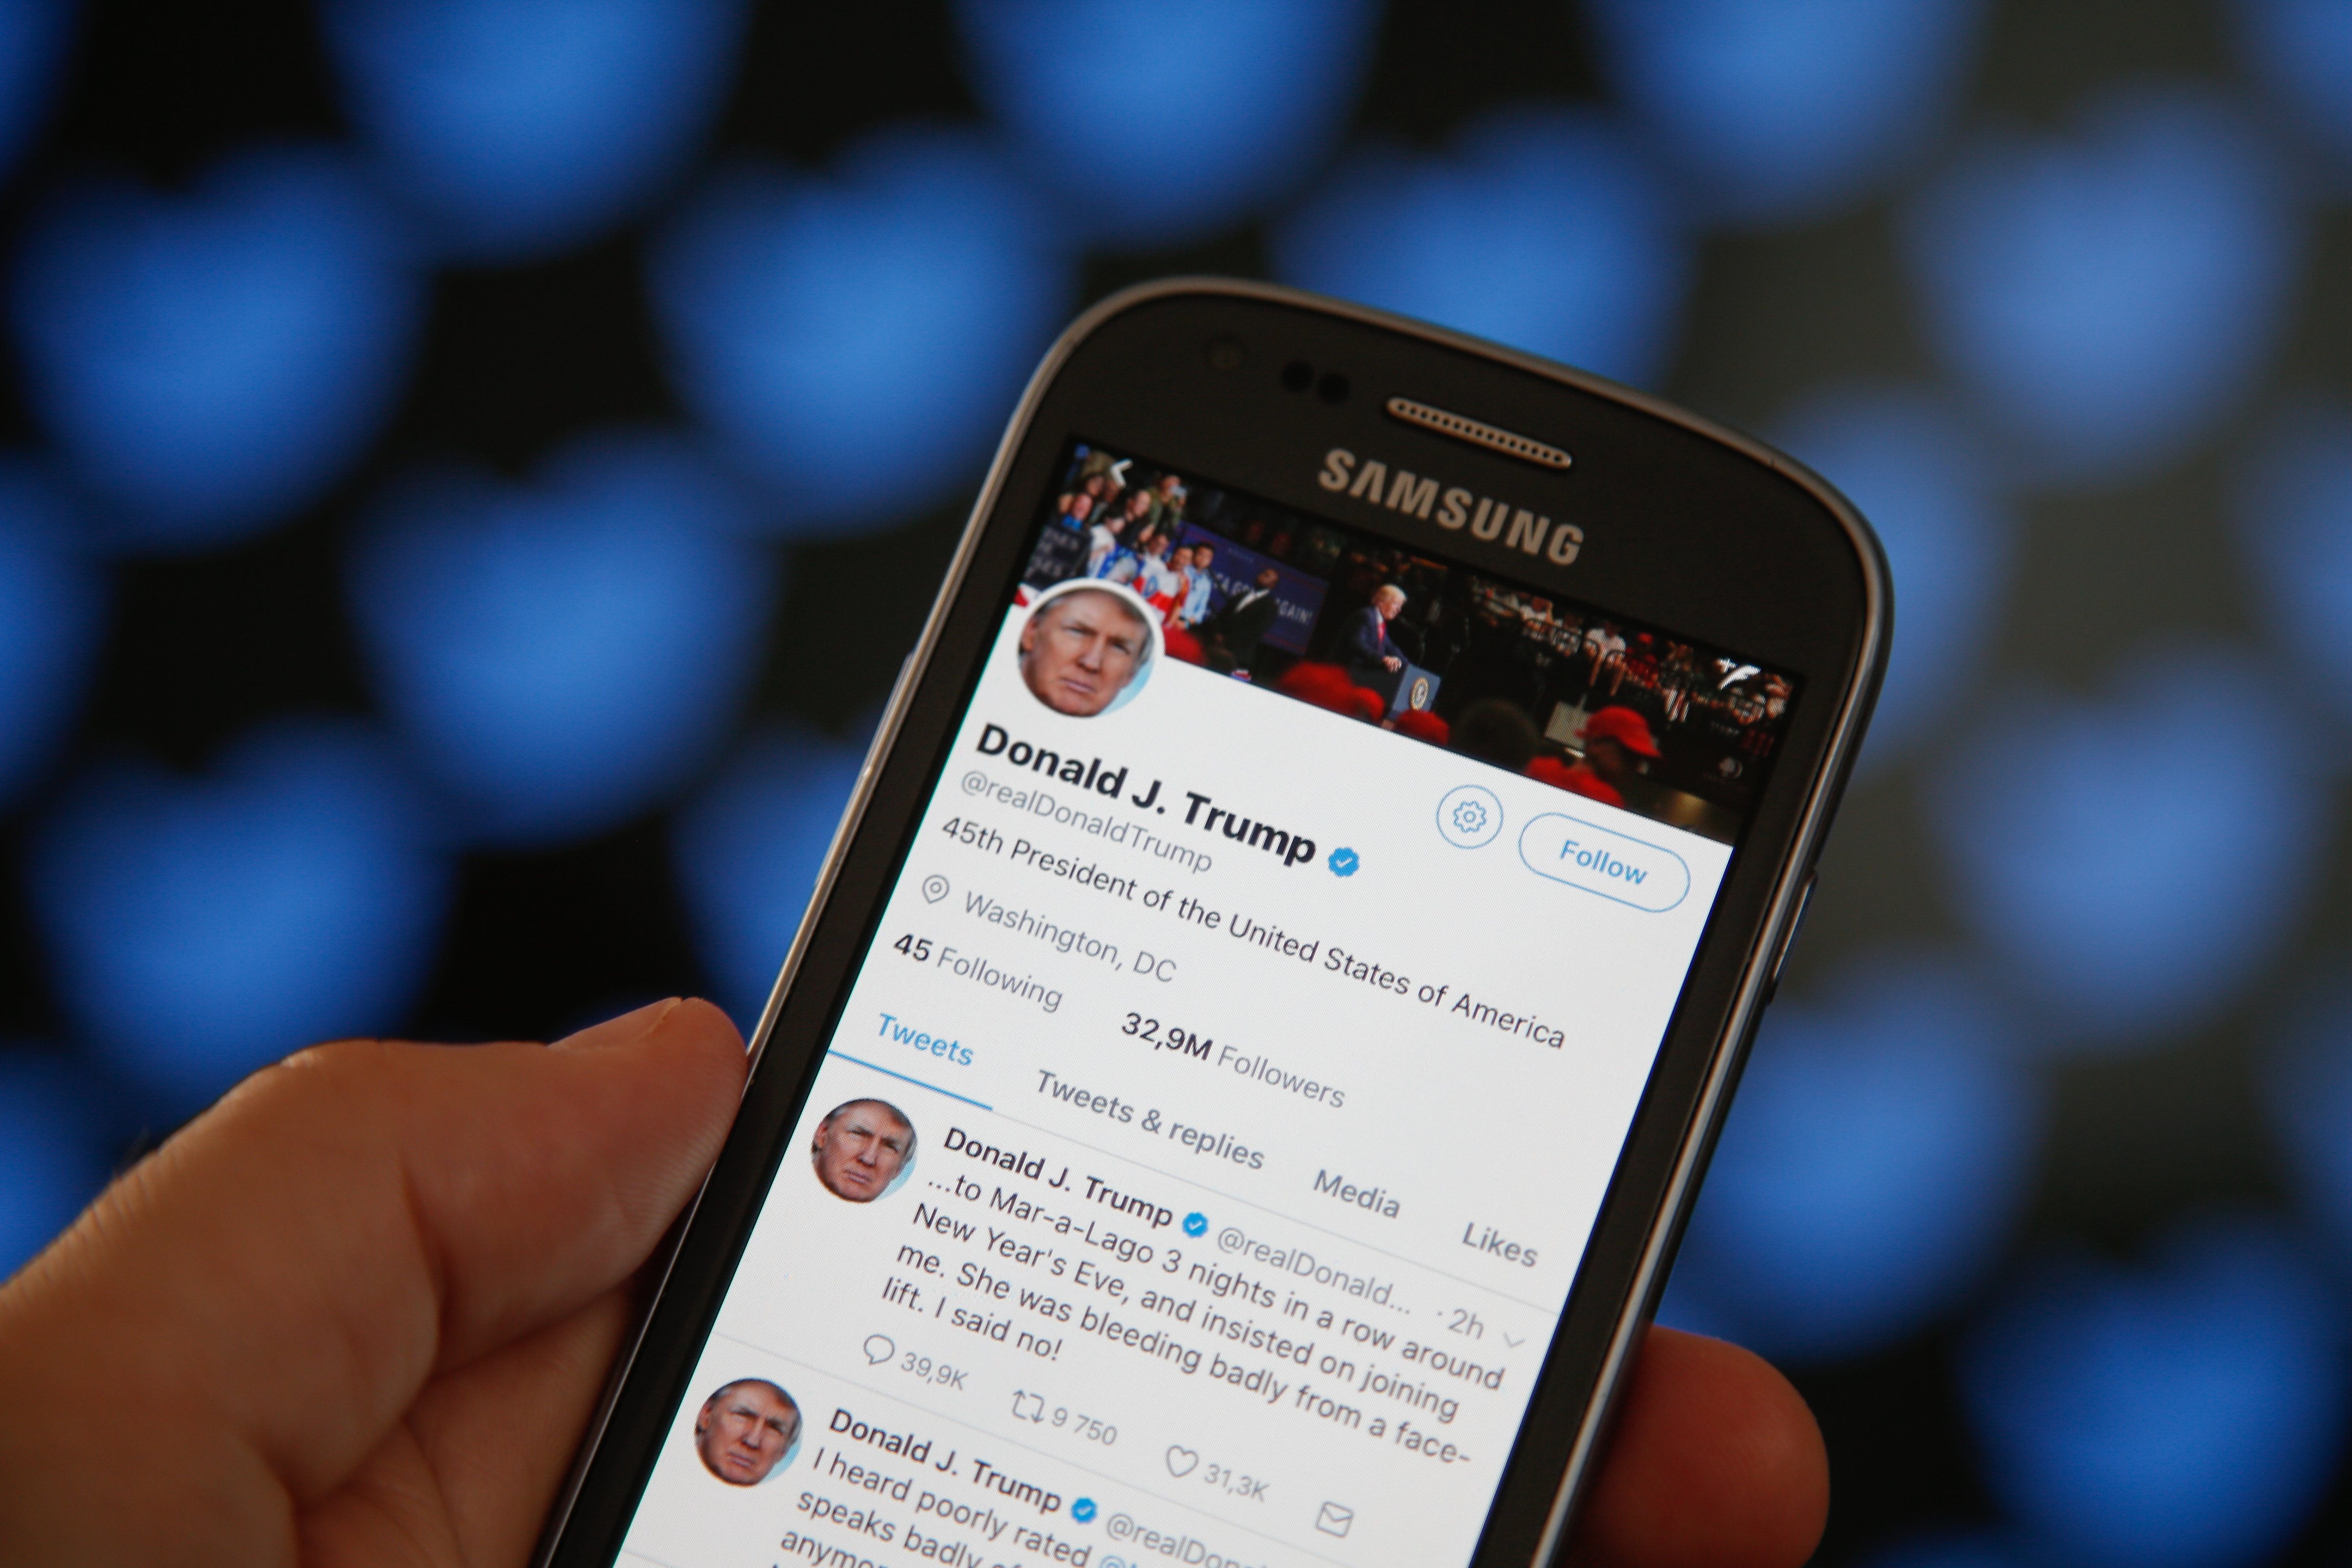 In this file photo, the Twitter timeline of President Donald Trump is seen on June 29, 2017, in Bydgoszcz, Poland after the President insulted TV show host Mika Brzezinski on the platform, claiming he was bullied by Mrs. Brzezinski and her co-hosts on their show Morning Joe on MSNBC. (NurPhoto — Getty Images)